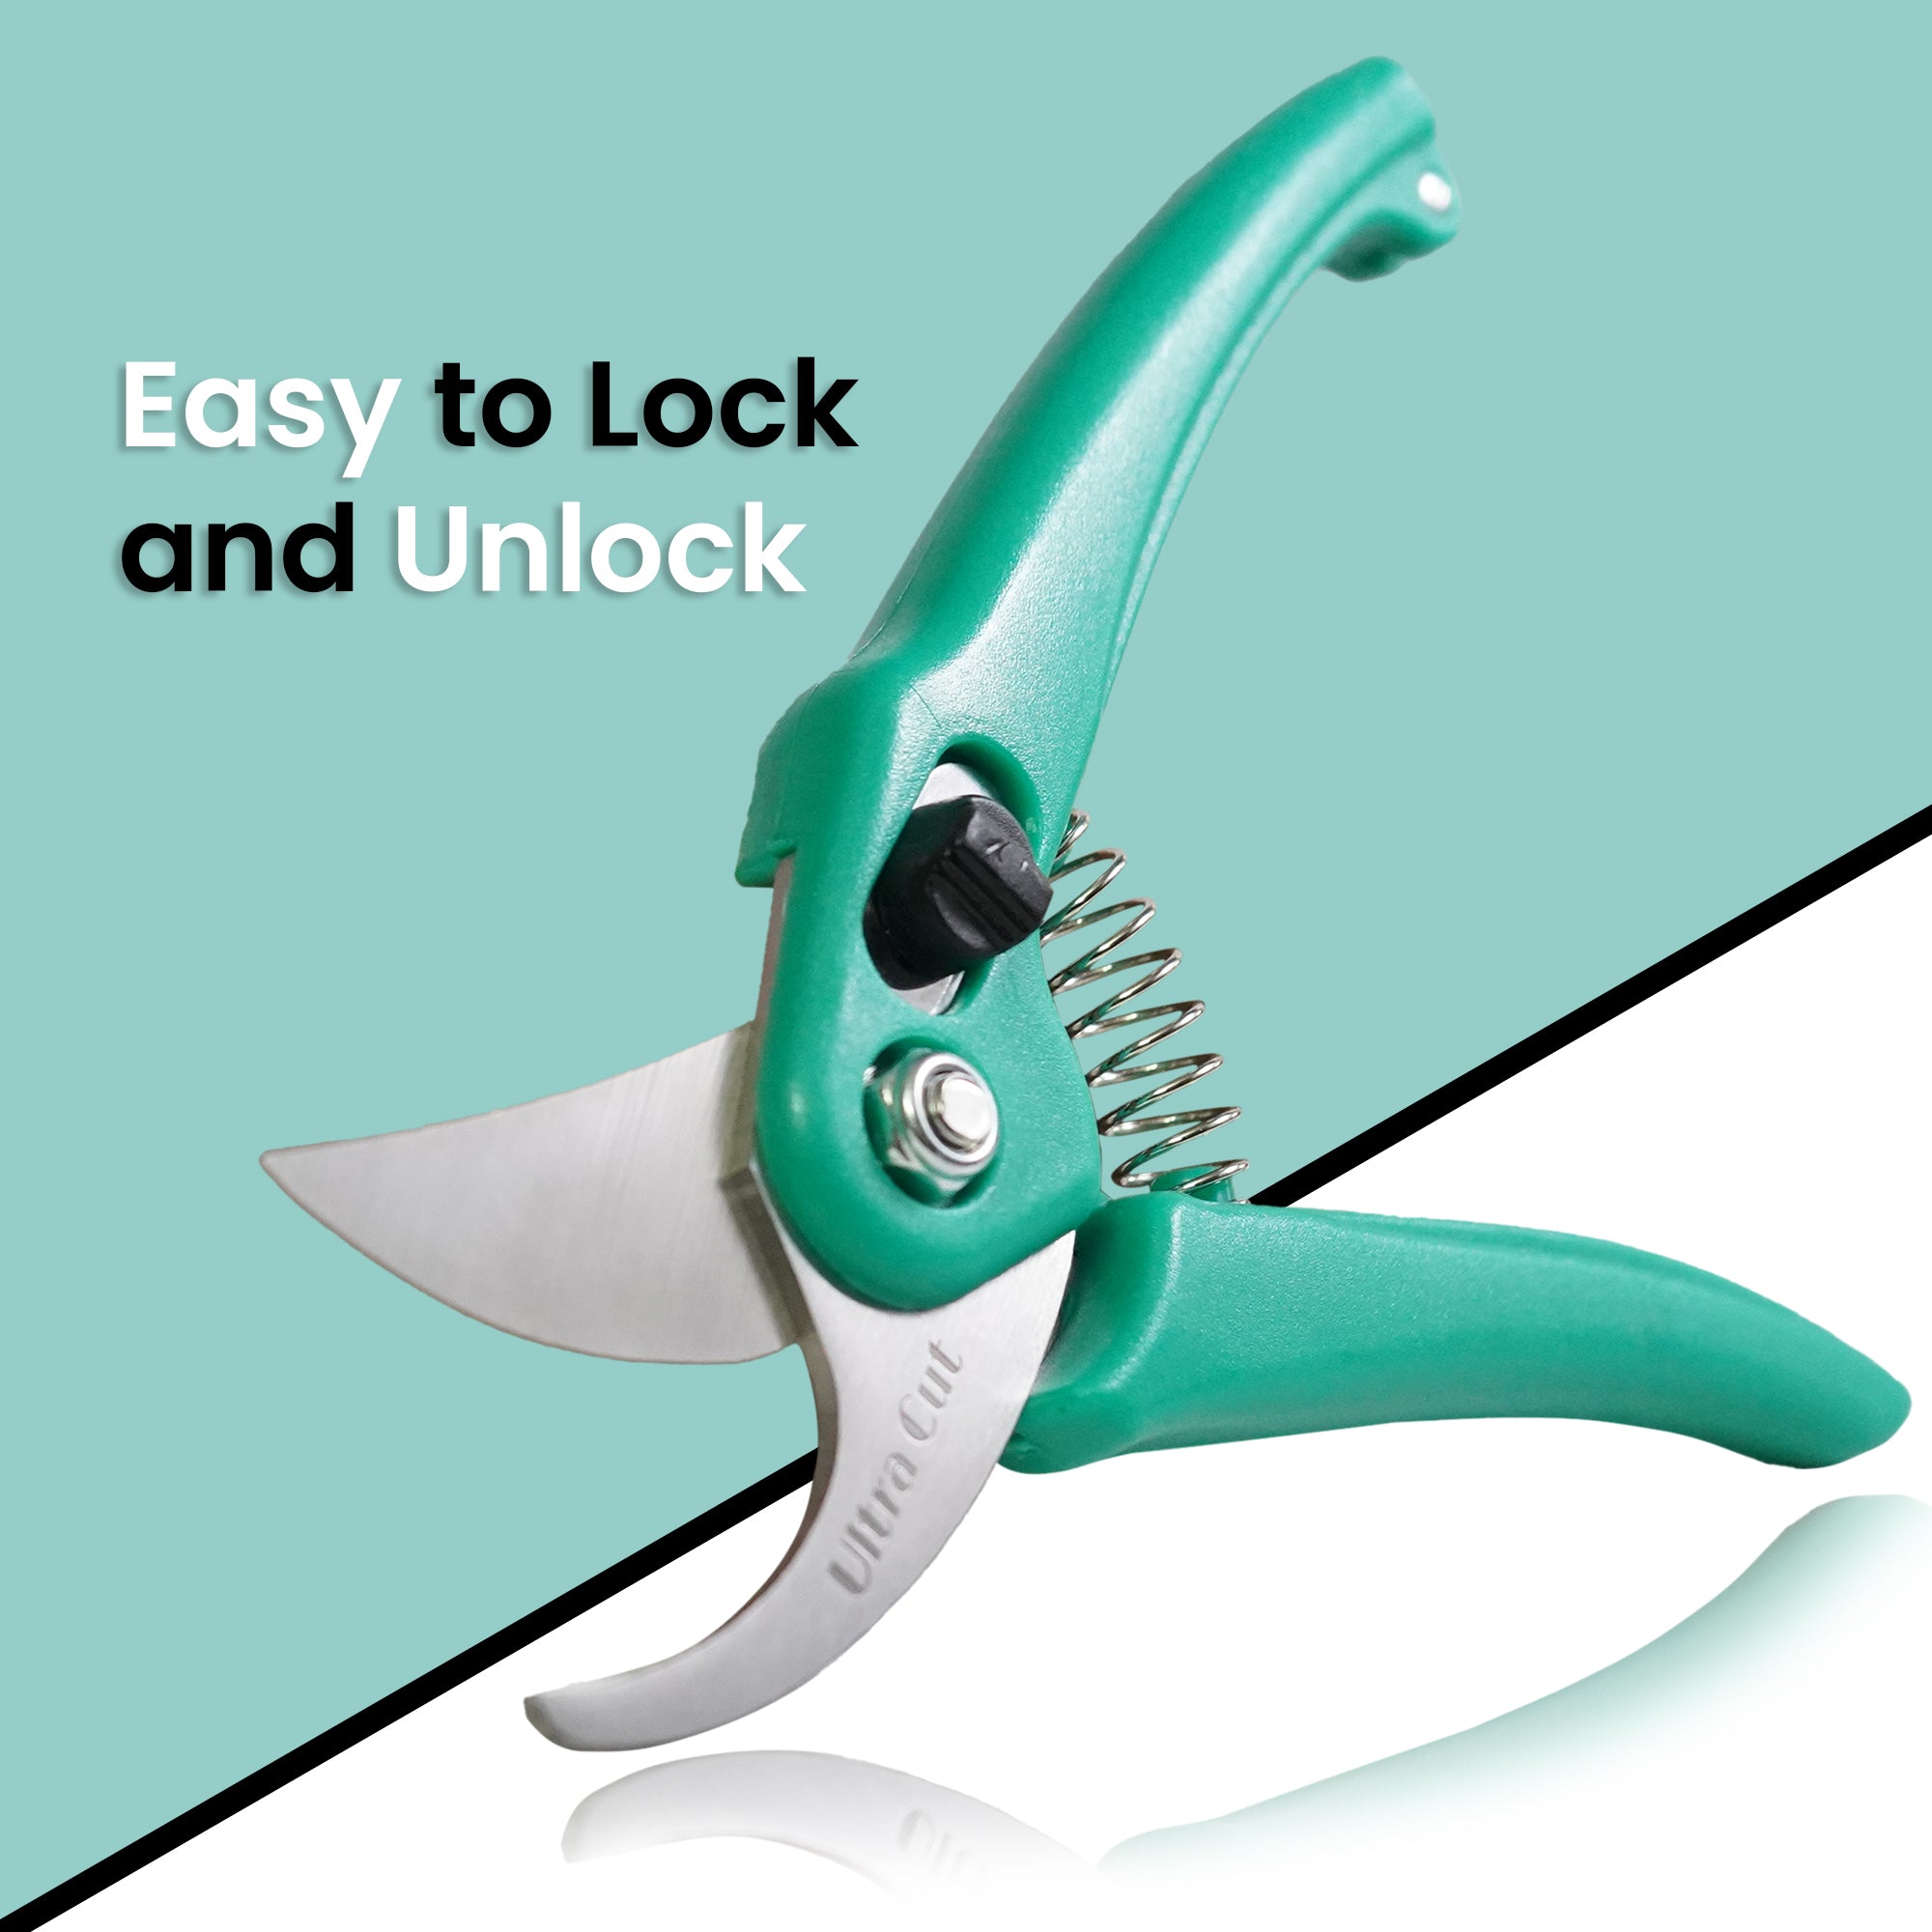 Manogyam Precision Pruner: Top-Quality Pruning Shears for Your Garden